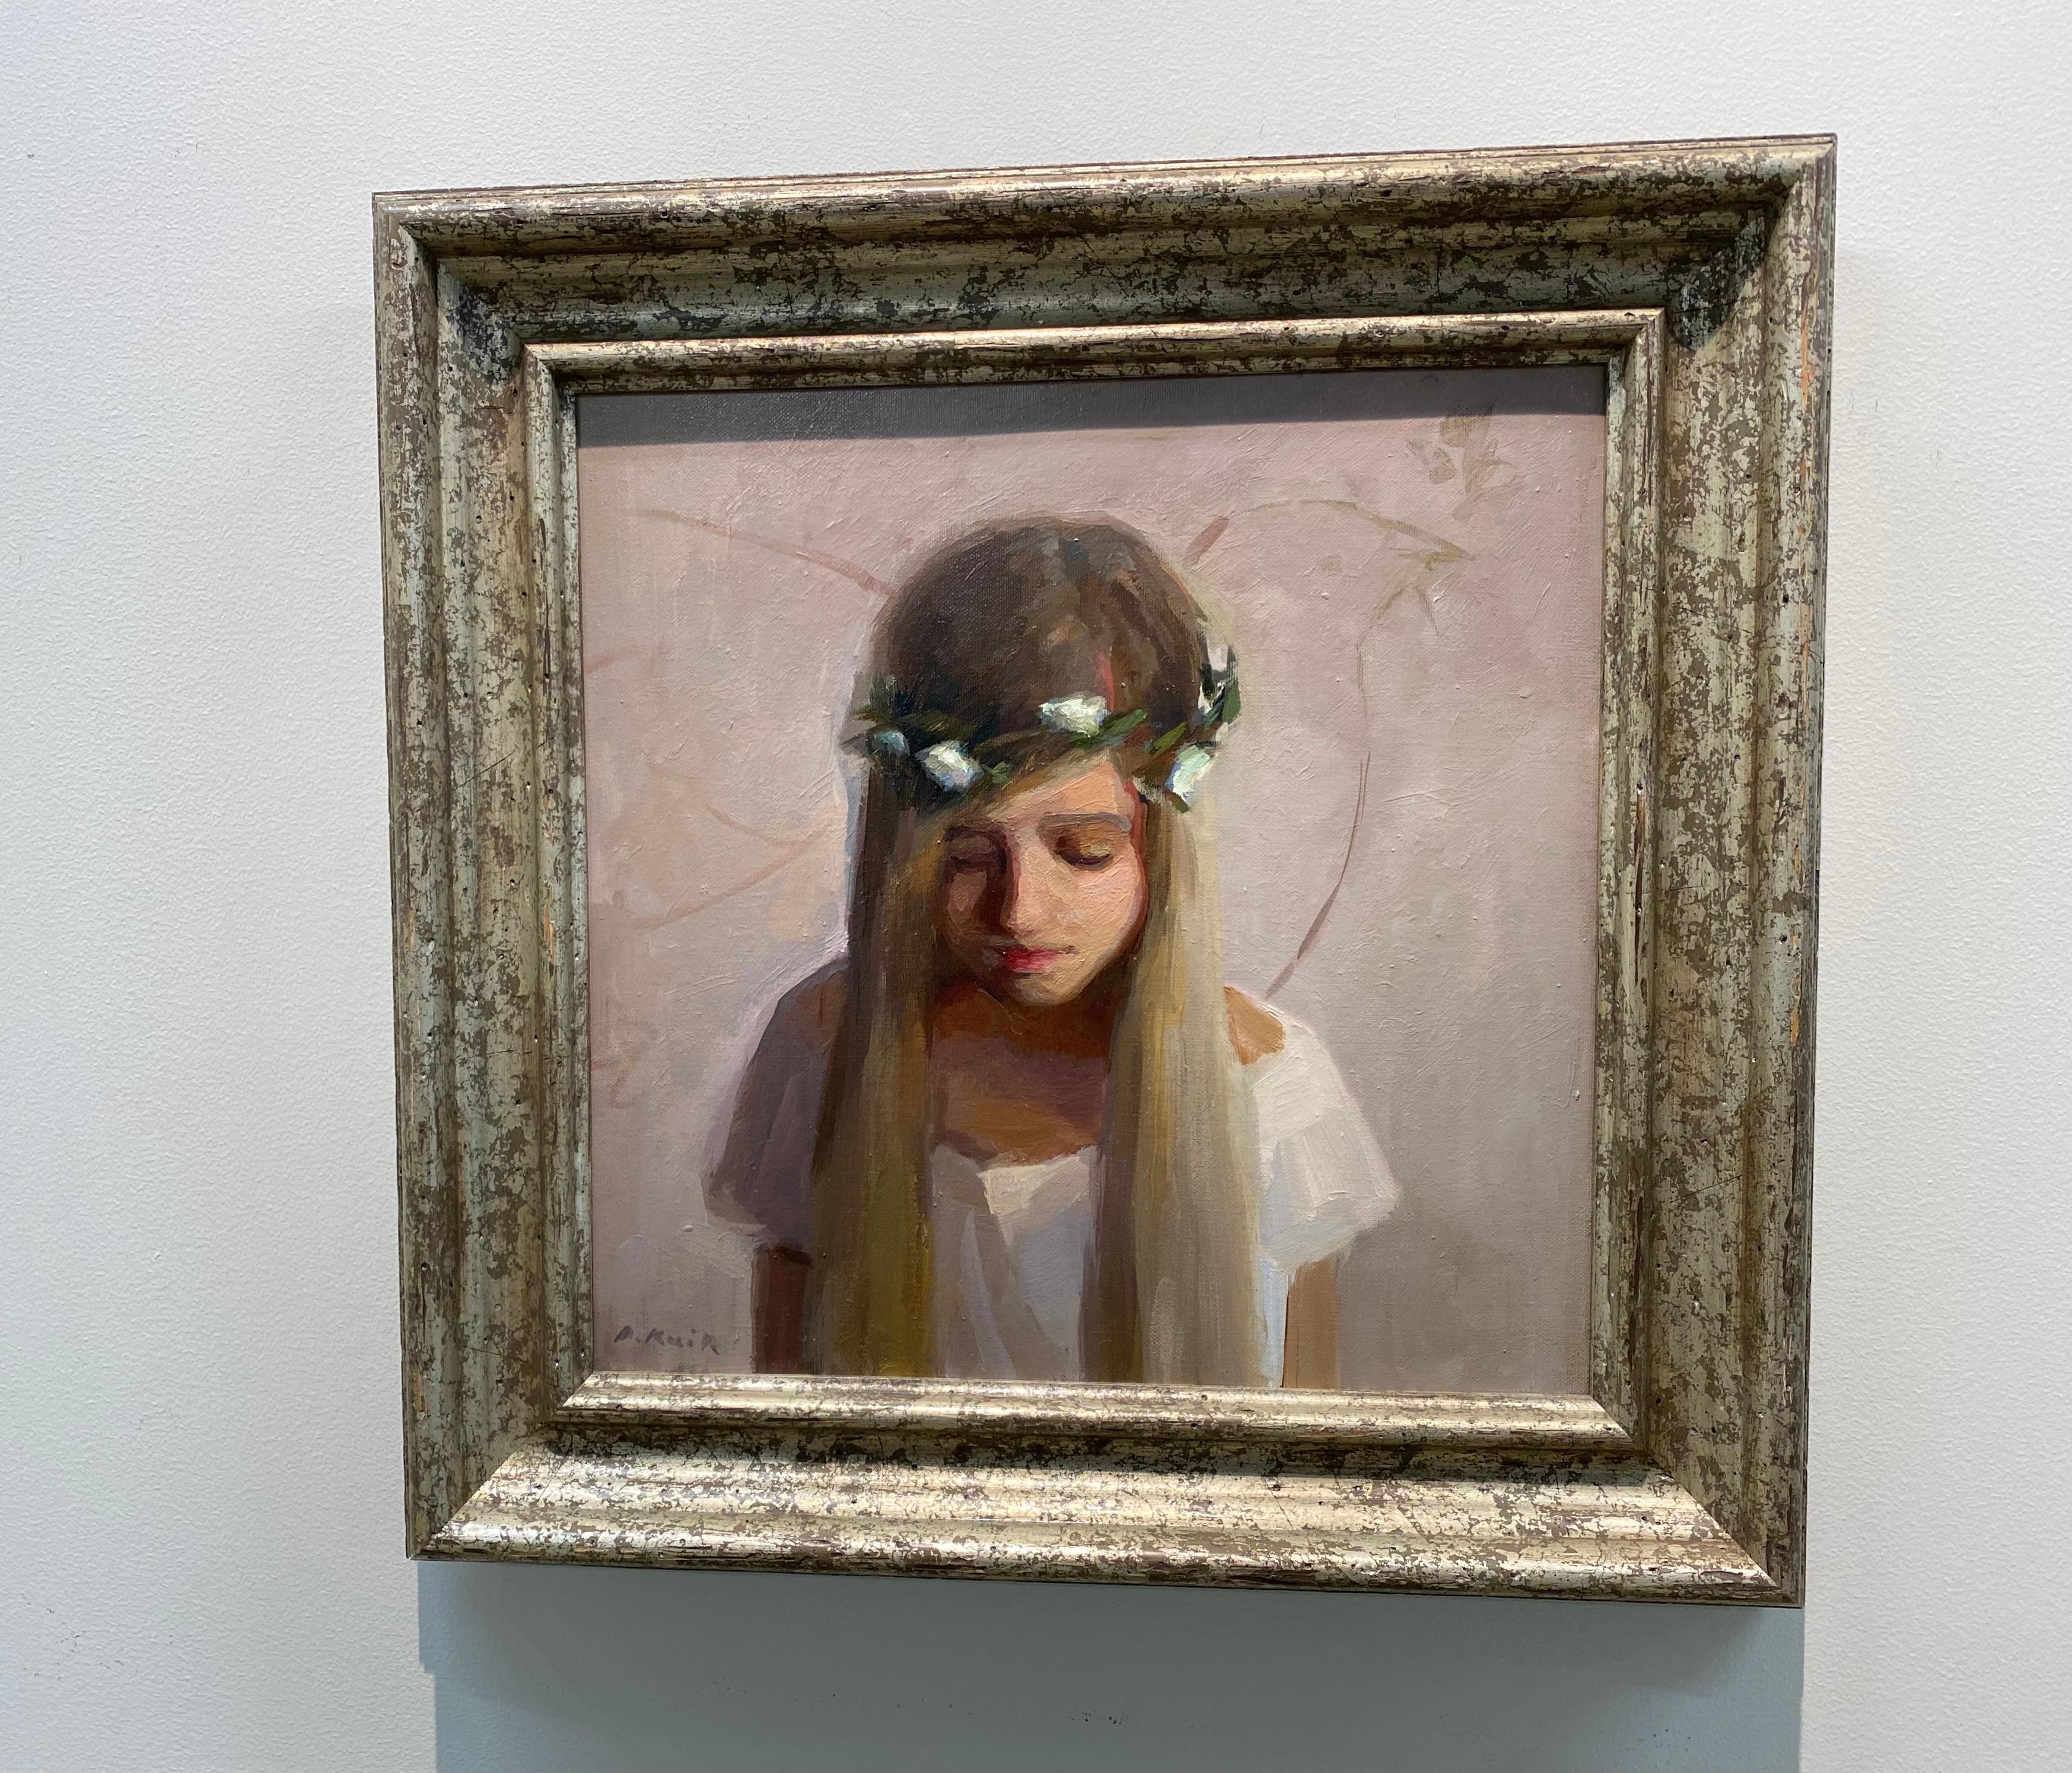 This painting is made by Dutch artist Anne Rixt Kuik. With frame it measures 57 x 54 cm. Her portraits and figure paintings in oils or in layers with epoxy and paint have become a worldwide known succes and novelty. The young artist graduated in